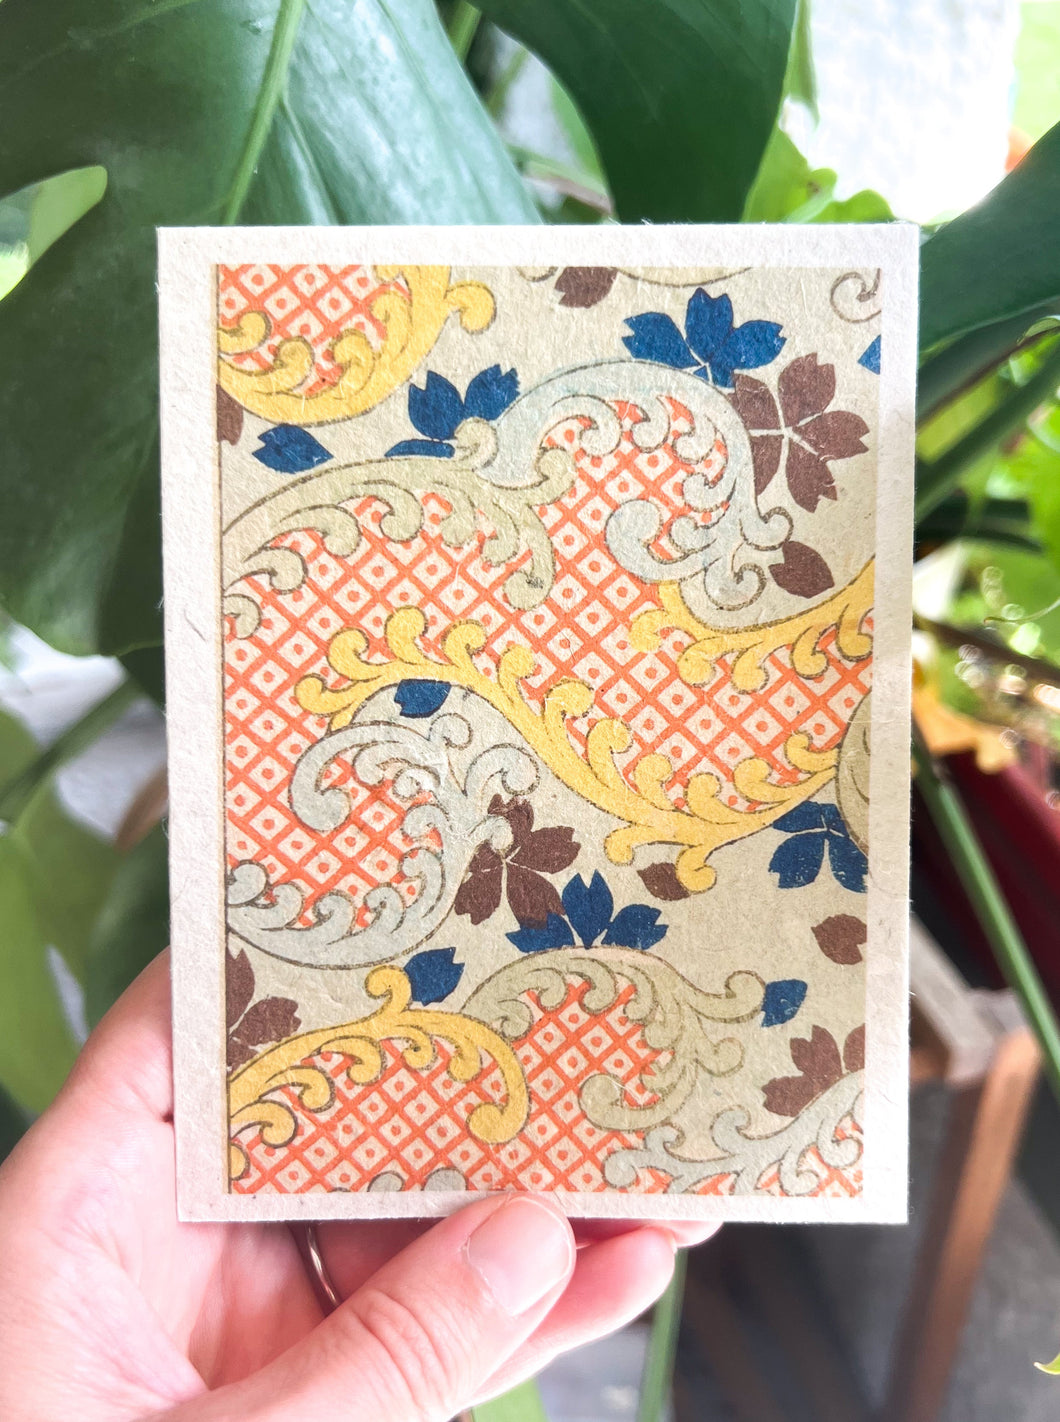 Japanese Plantable Seed Card || Zero Waste || Supports Women || Eco-friendly || J40